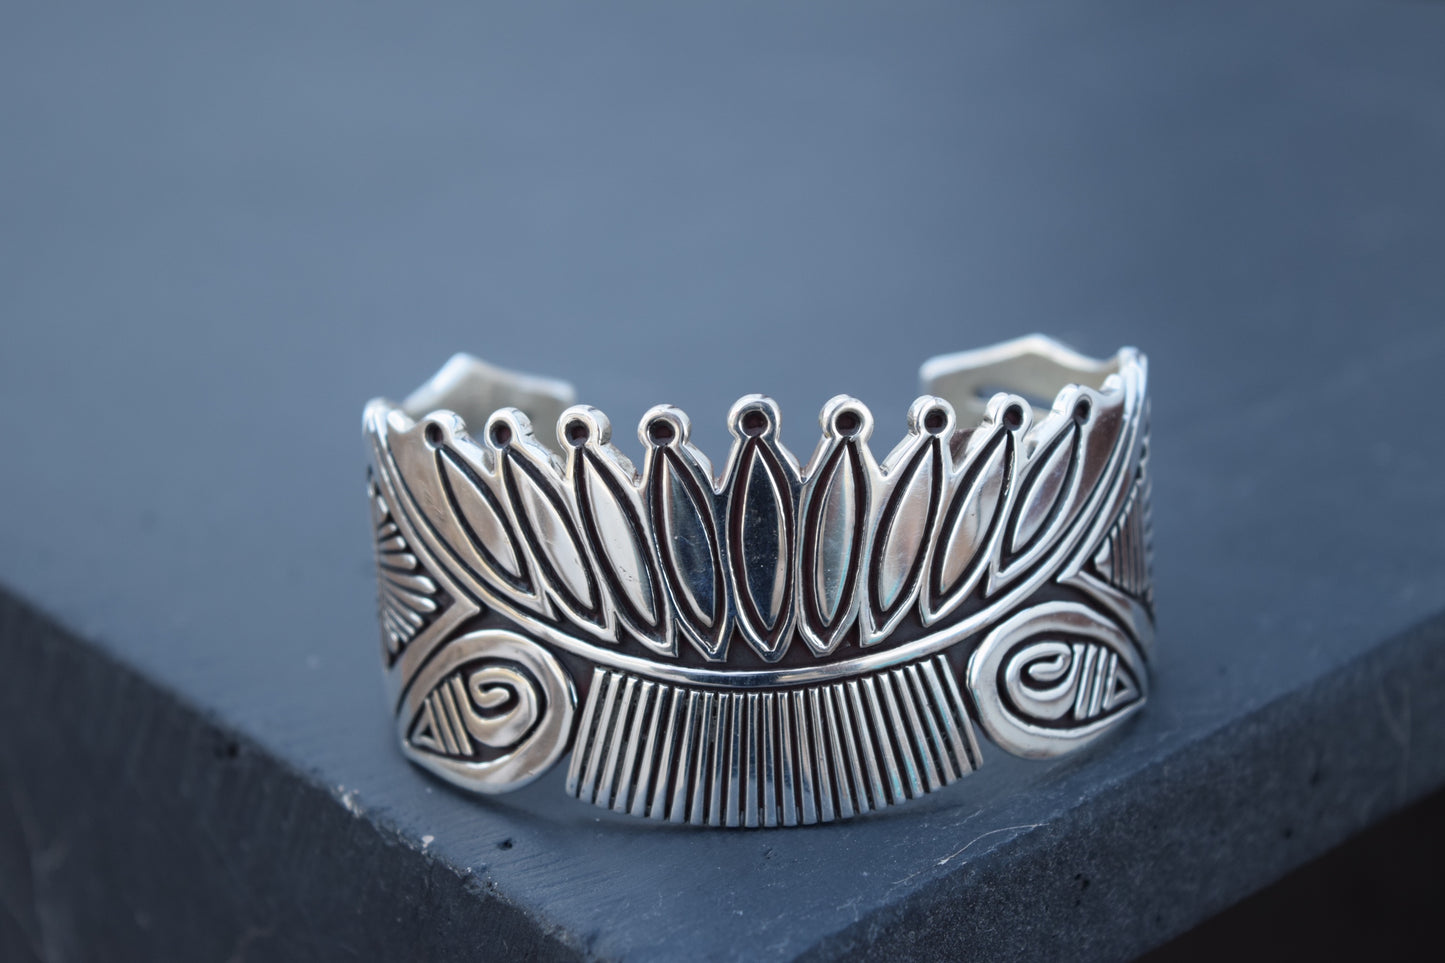 THE CROWN BRACELET FROM THE RODGERS COLLECTION